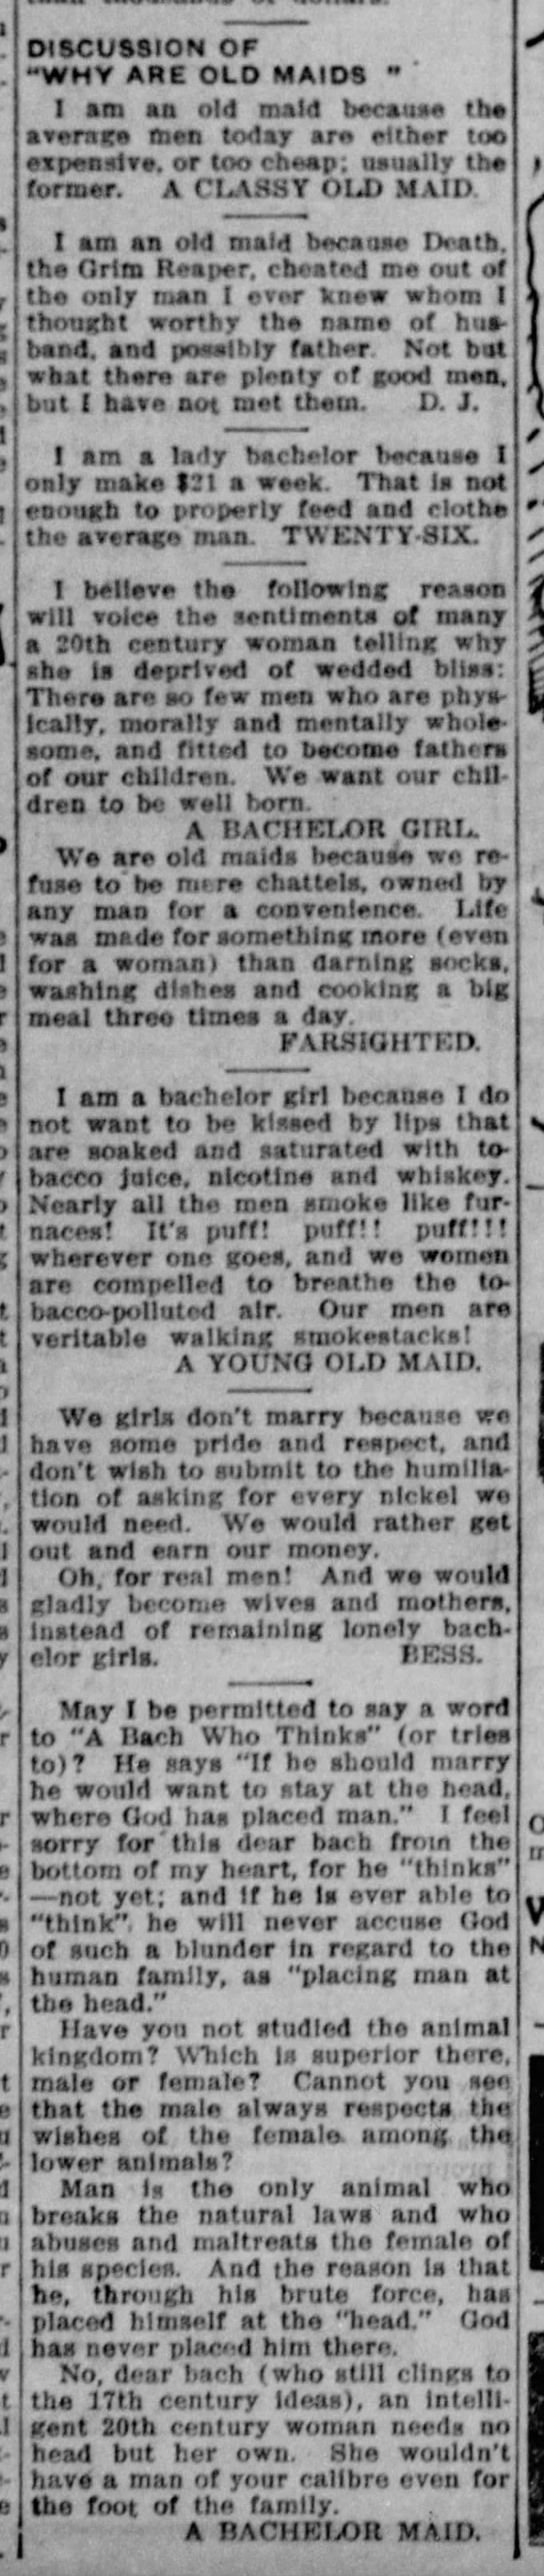 Women discuss why they are still single, 1912